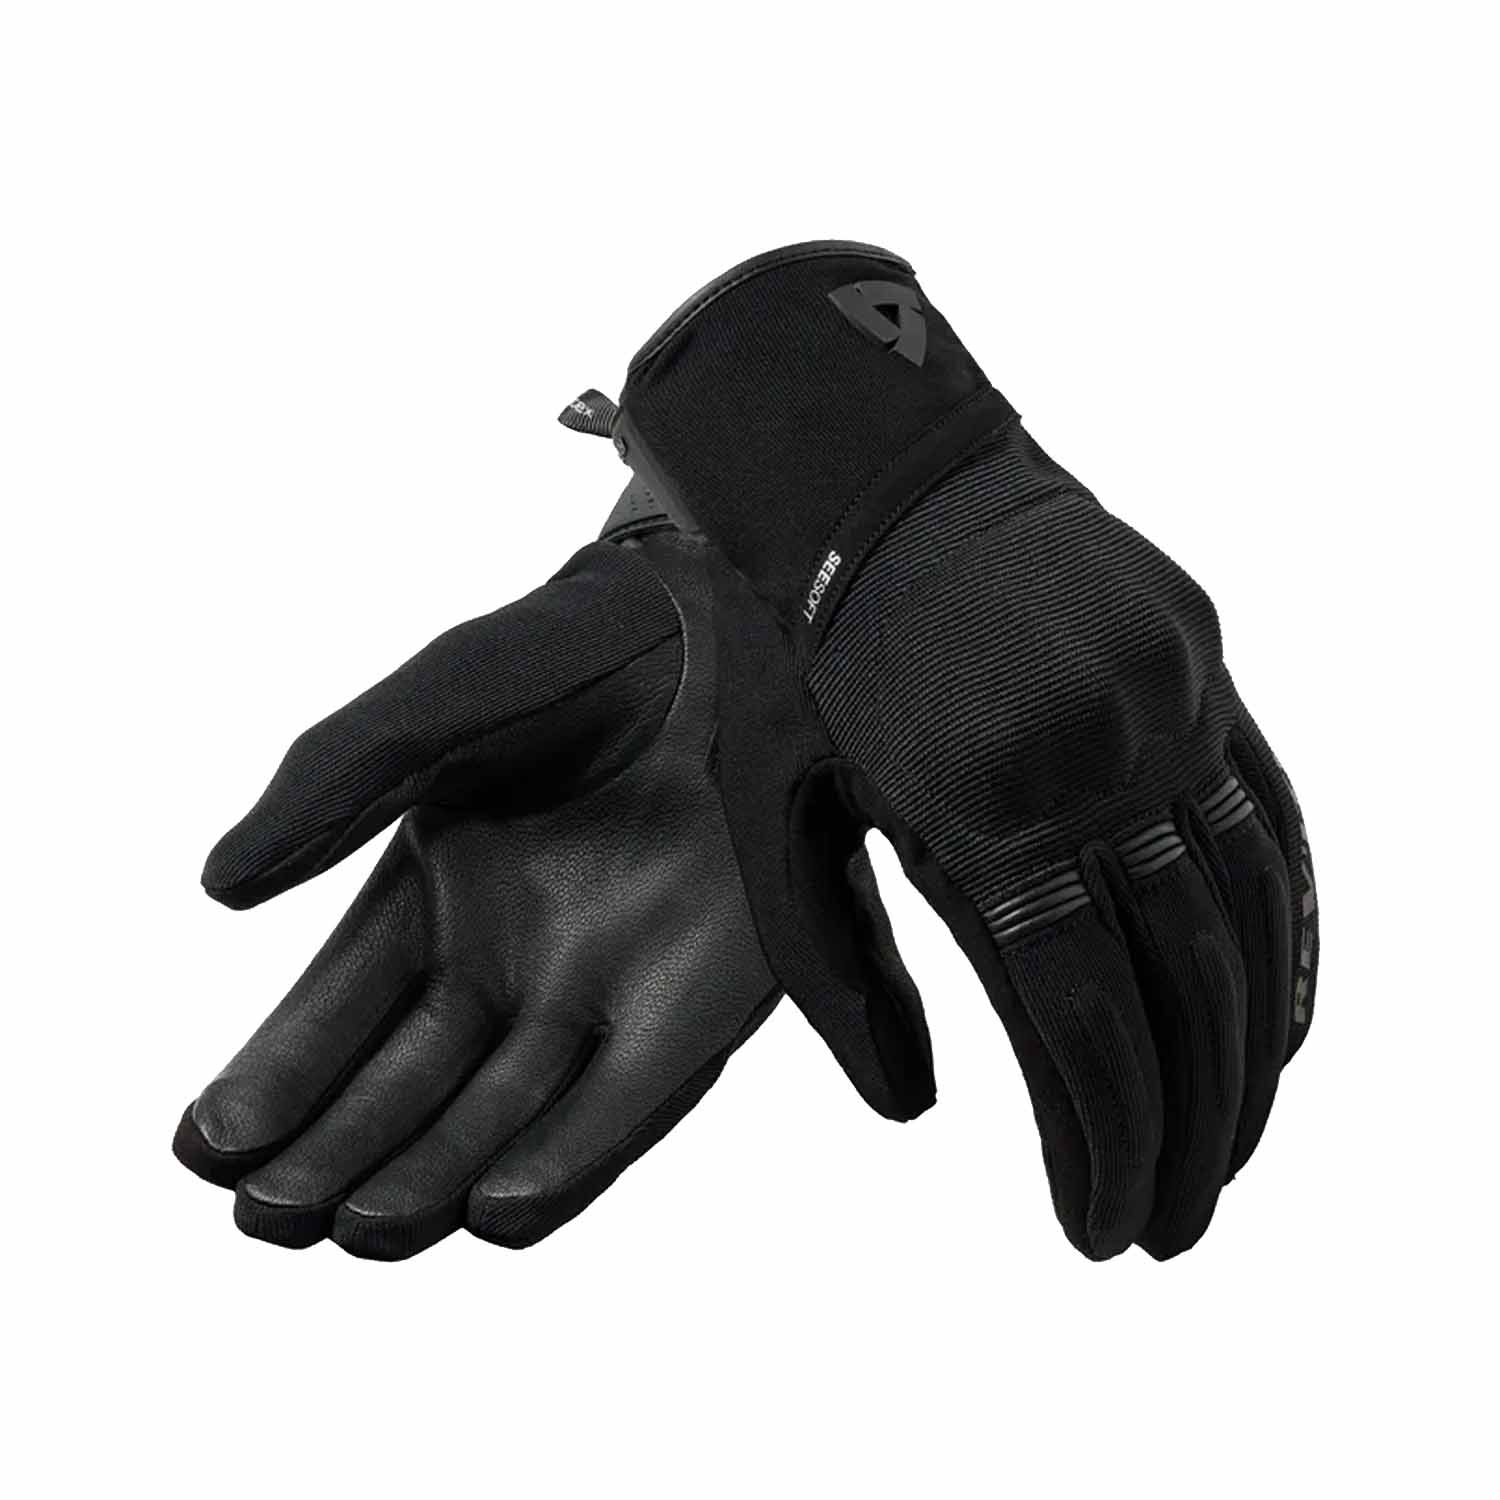 Image of EU REV'IT! Mosca 2 H2O Gloves Ladies Black Taille L